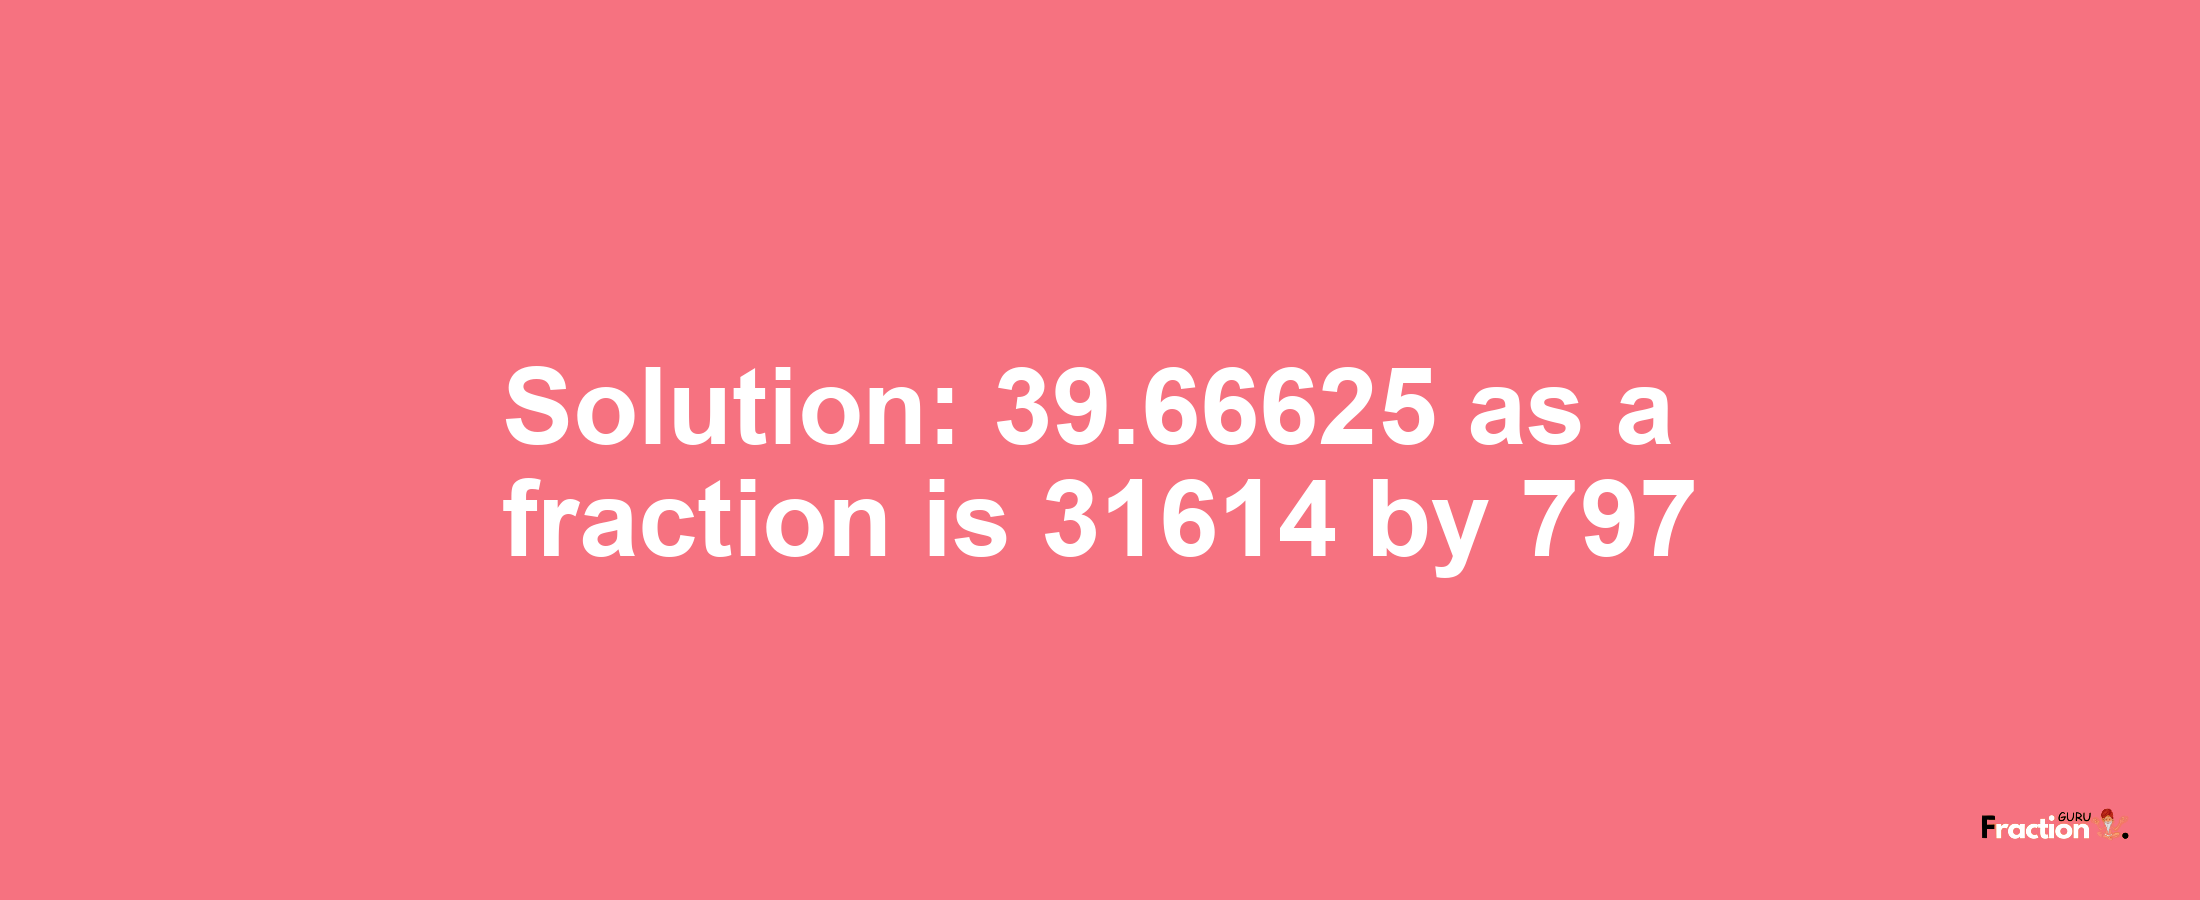 Solution:39.66625 as a fraction is 31614/797